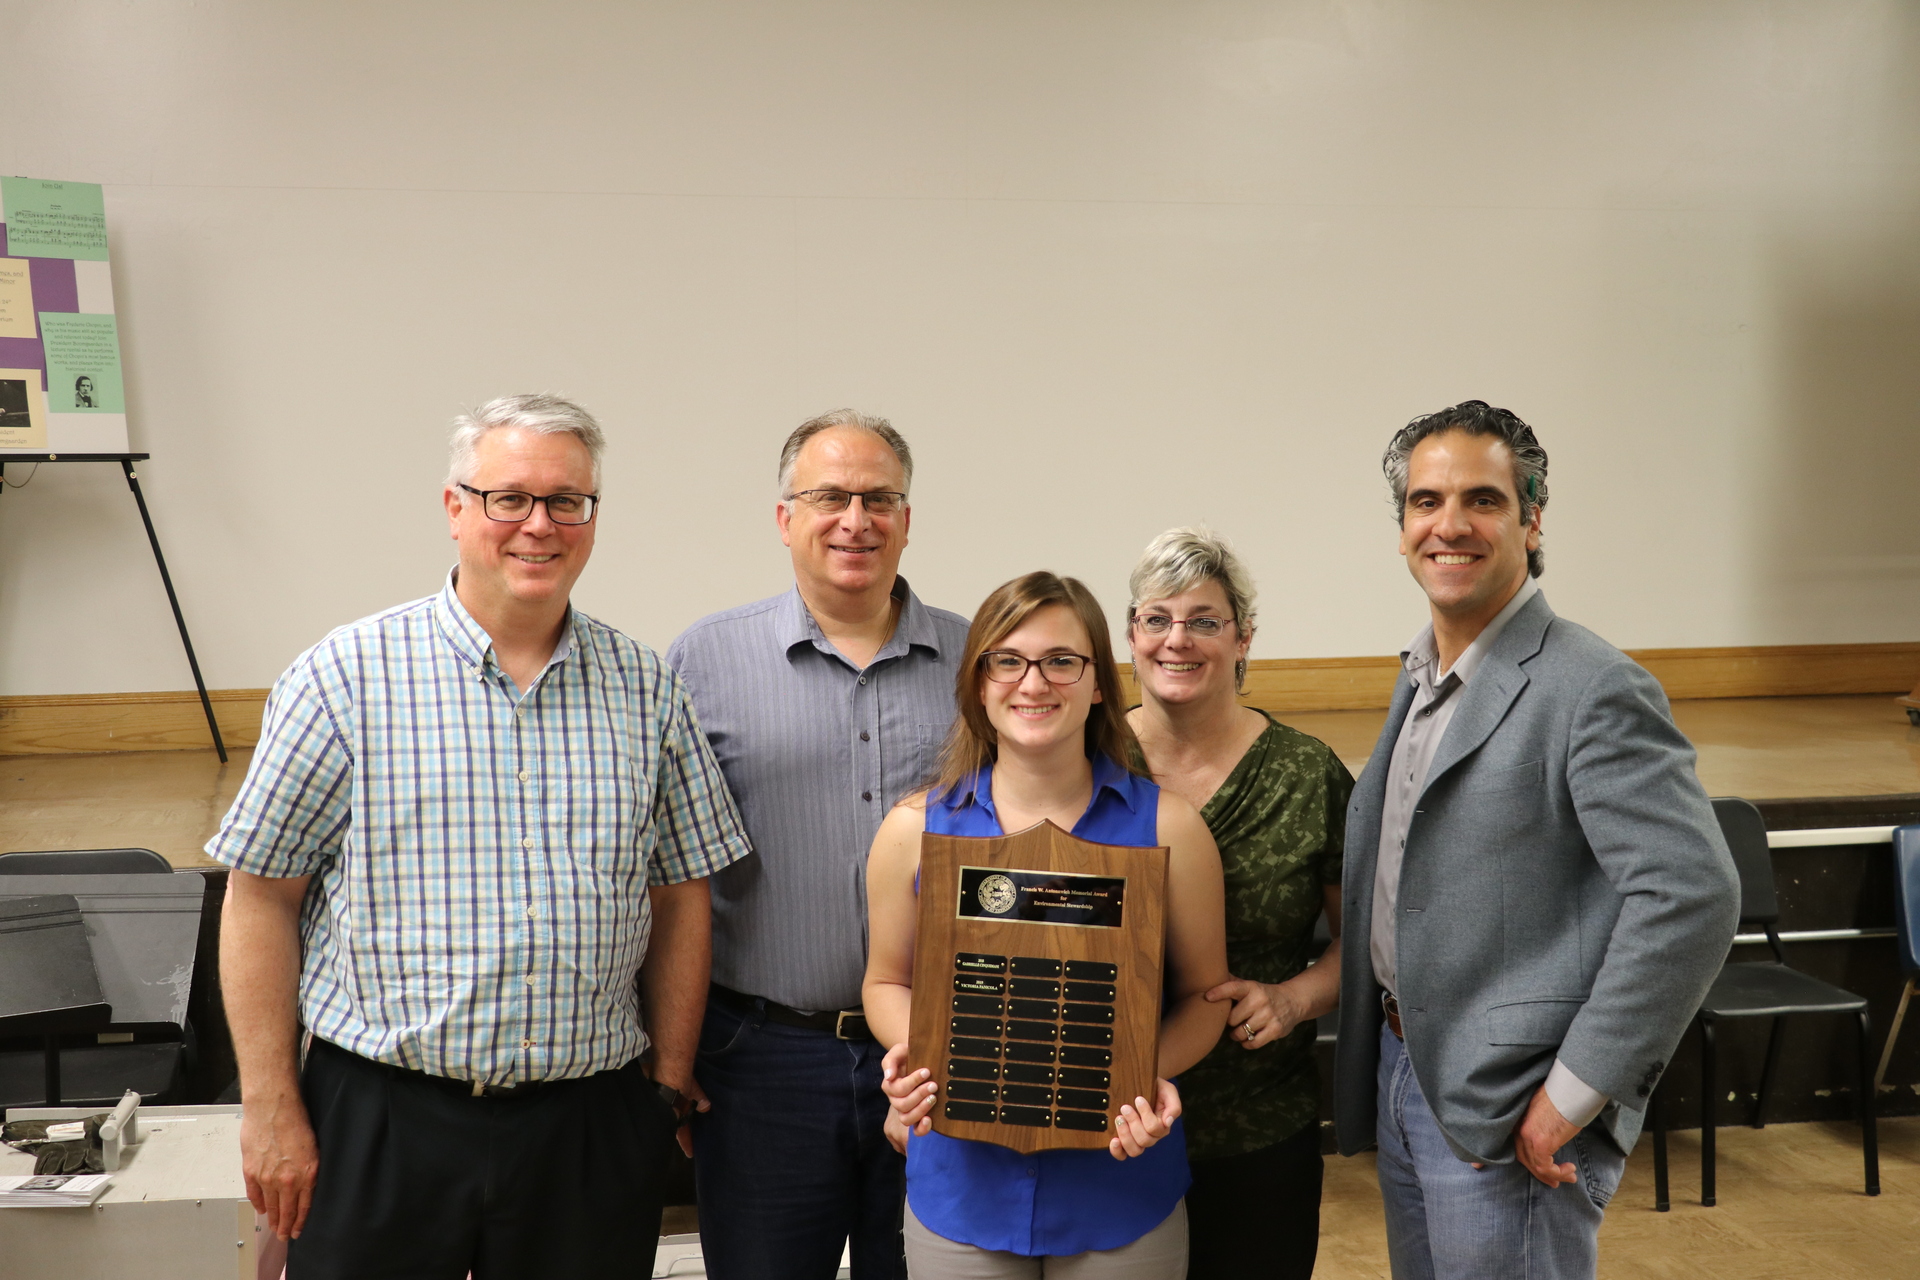 Victoria Panicola with her parents, Dr. Rountos, and Dr. Antonawich (father of Francis W. Antonawich and professor and chair of SJC's Department of Biology).